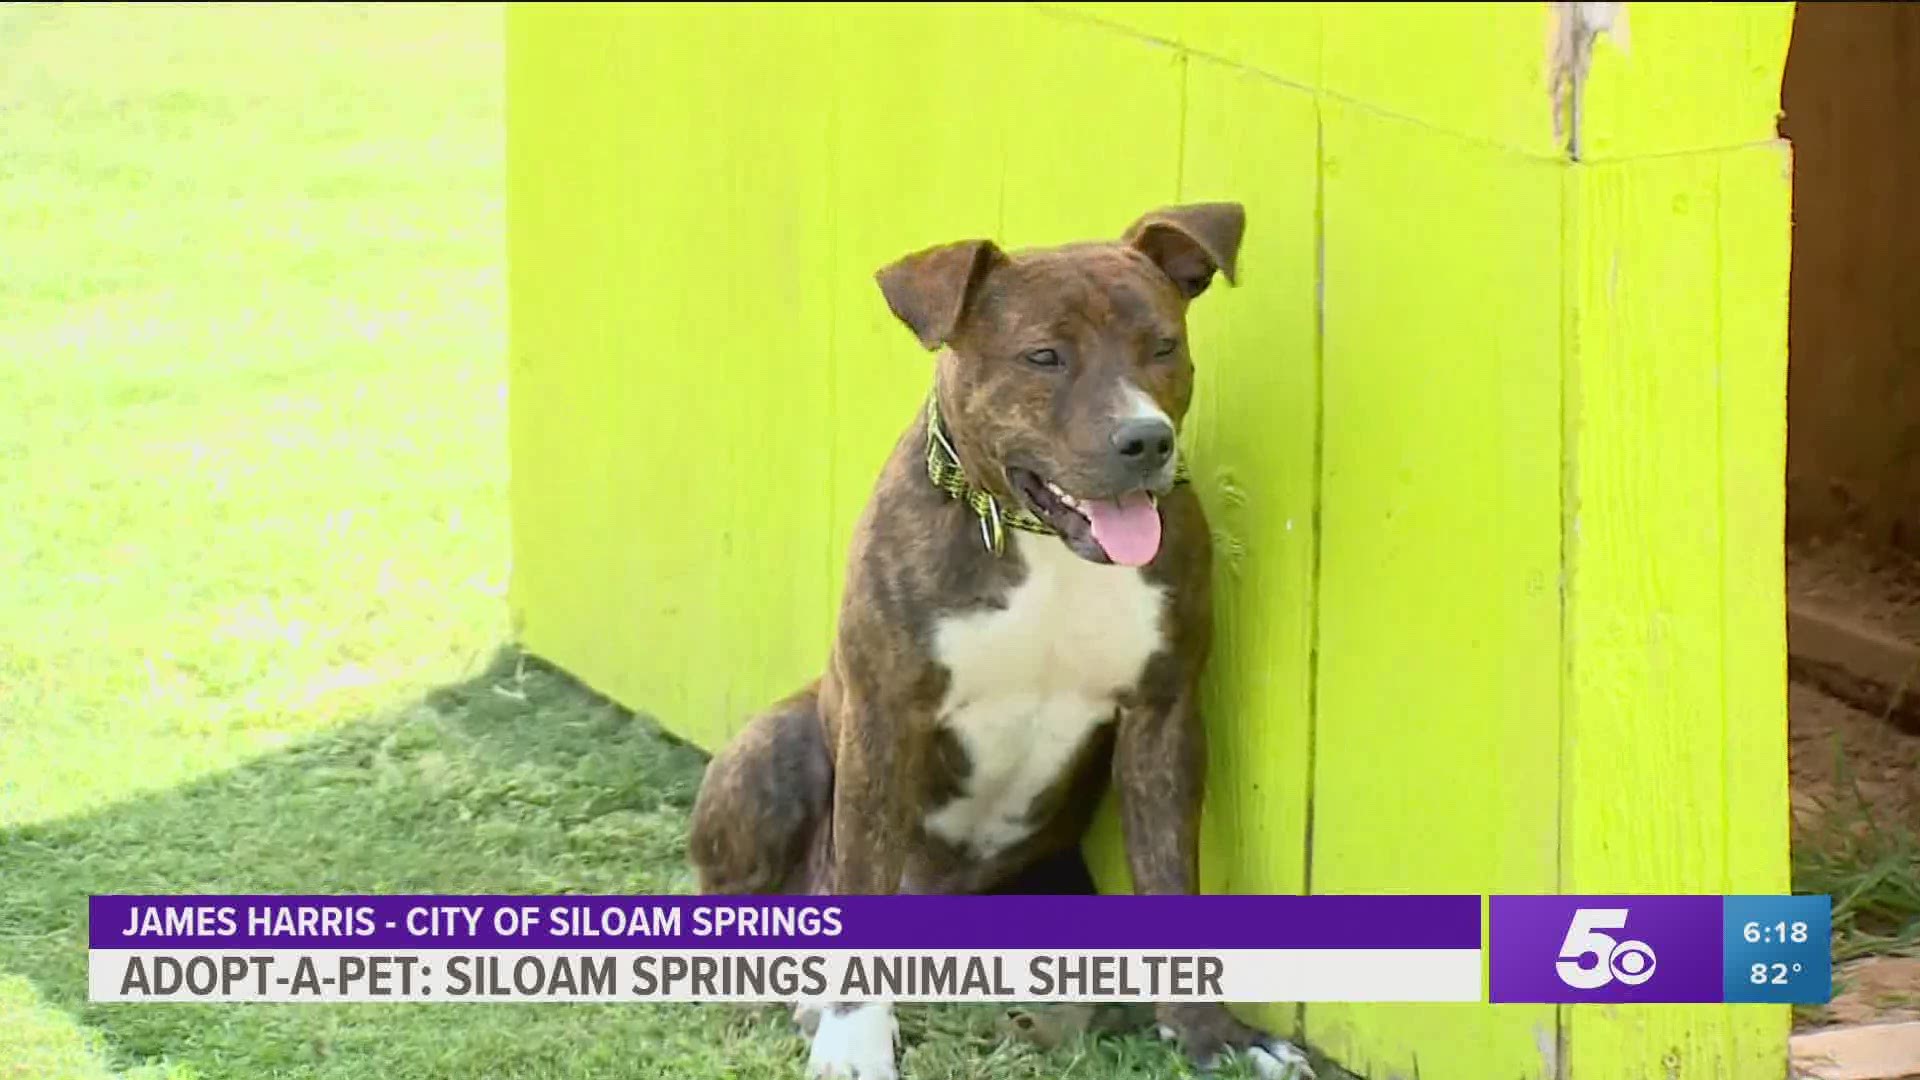 One-year-old brindle colored pit-mix "My Cousin Vinny," or just Vinny for short, was found as a stray. https://bit.ly/2XvKbWz